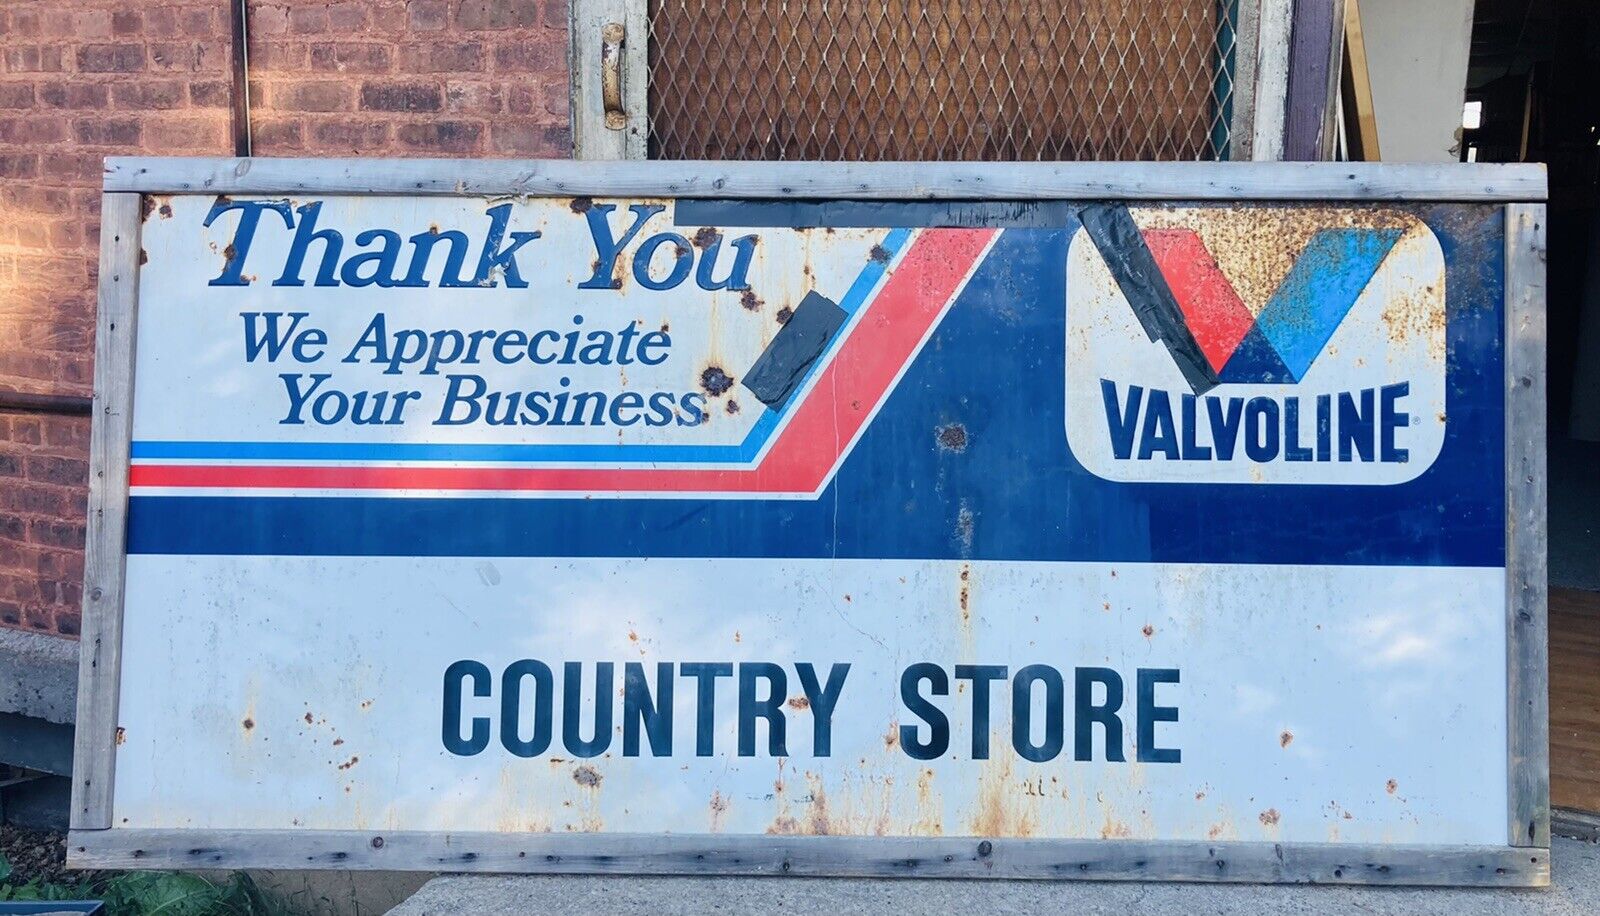 VTG VALVOLINE GAS STATION/COUNTRY STORE ADVERTISING APPROX 94x46